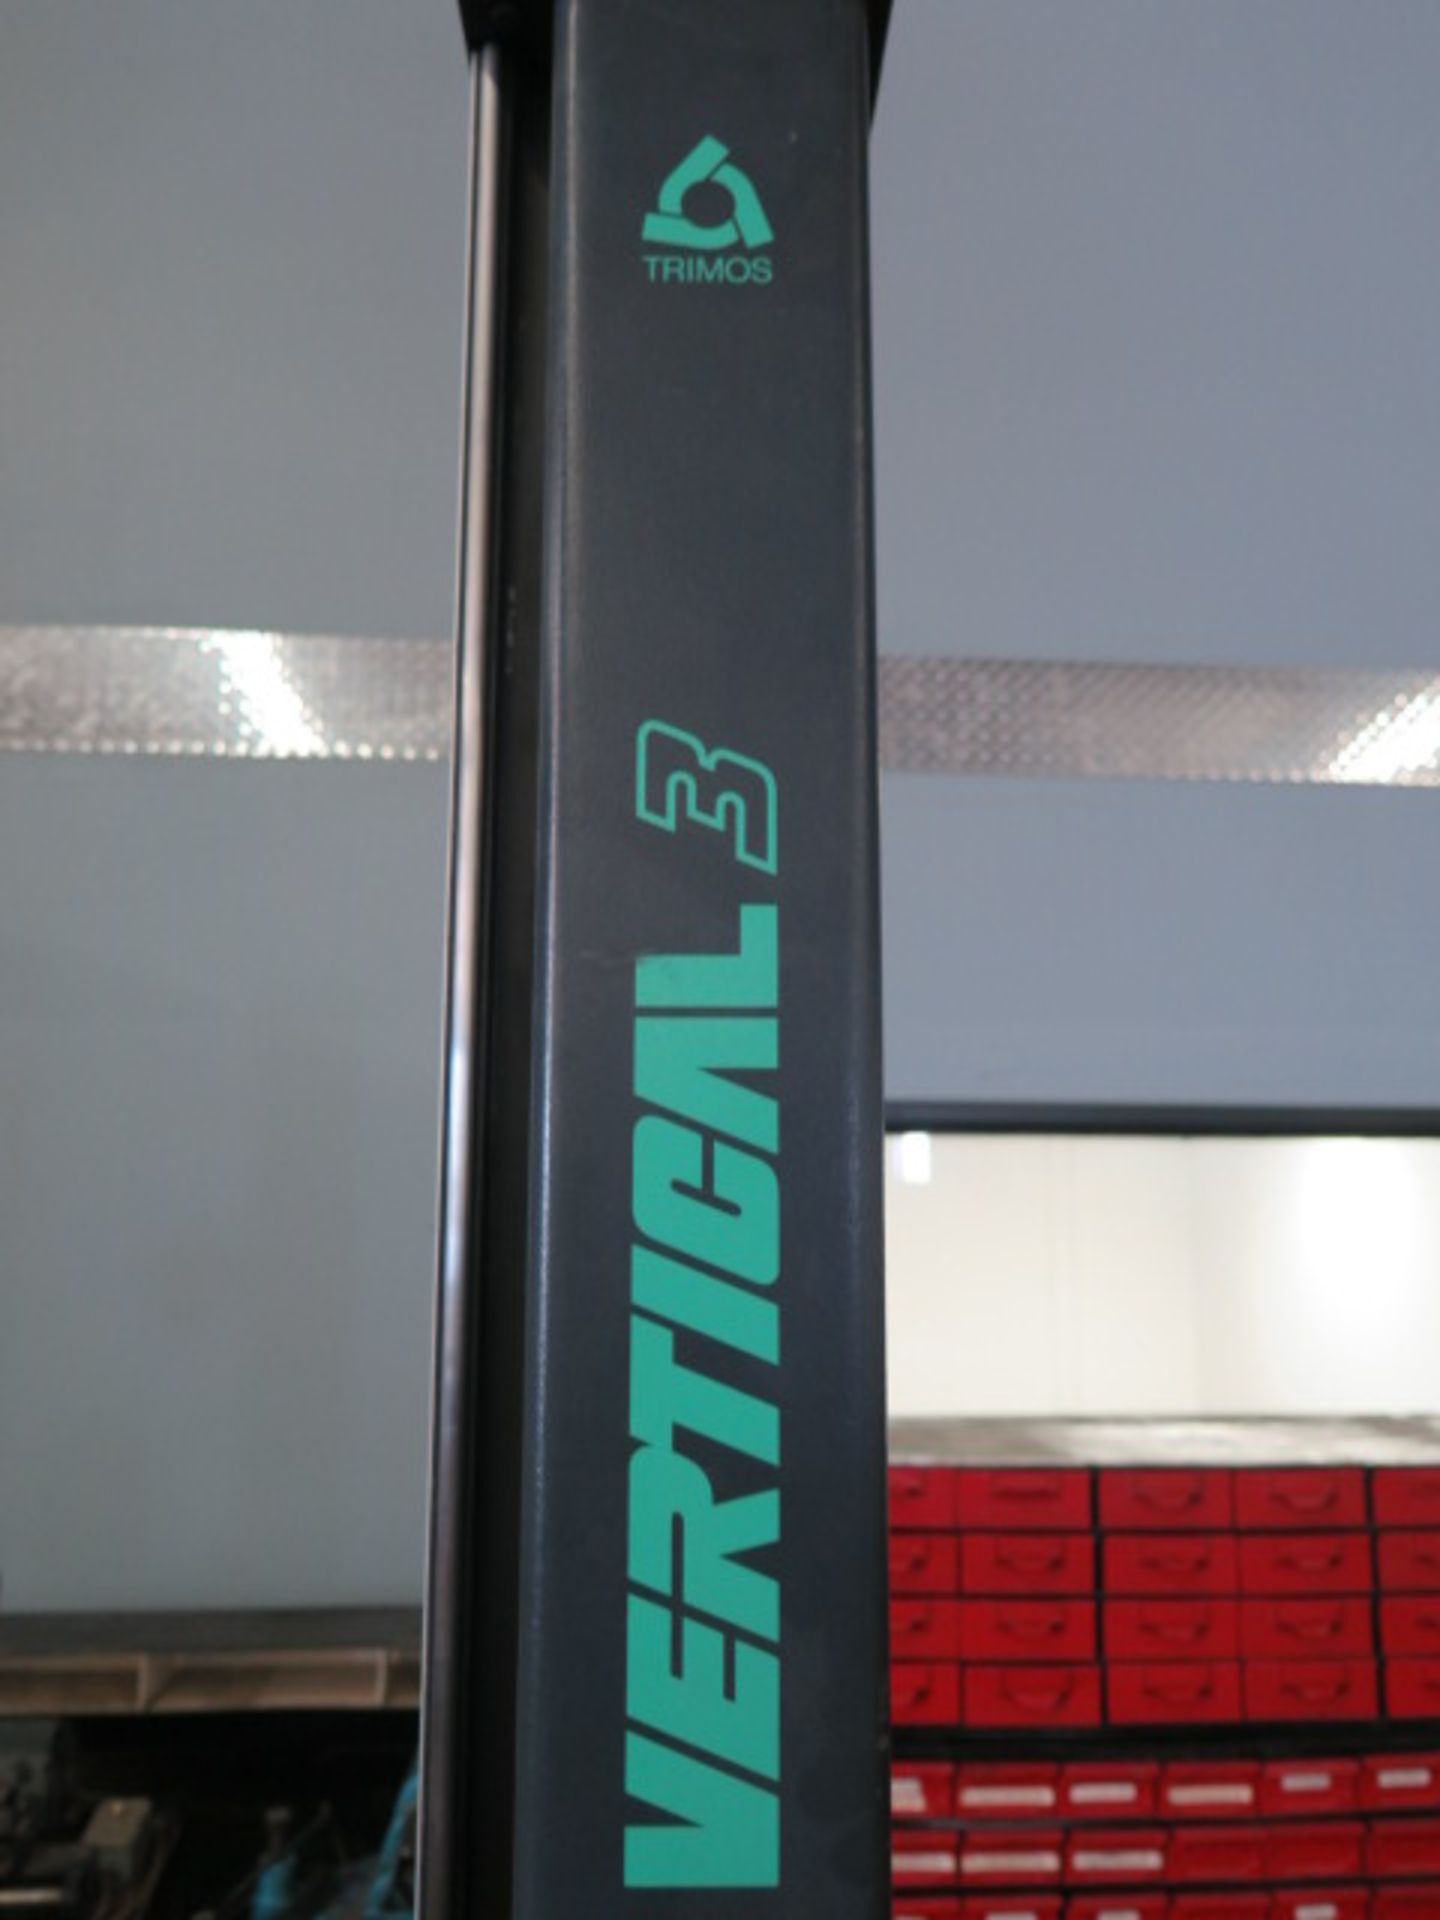 Fowler Trimos Vertical-3 36” Digital Height Gage - Image 4 of 5